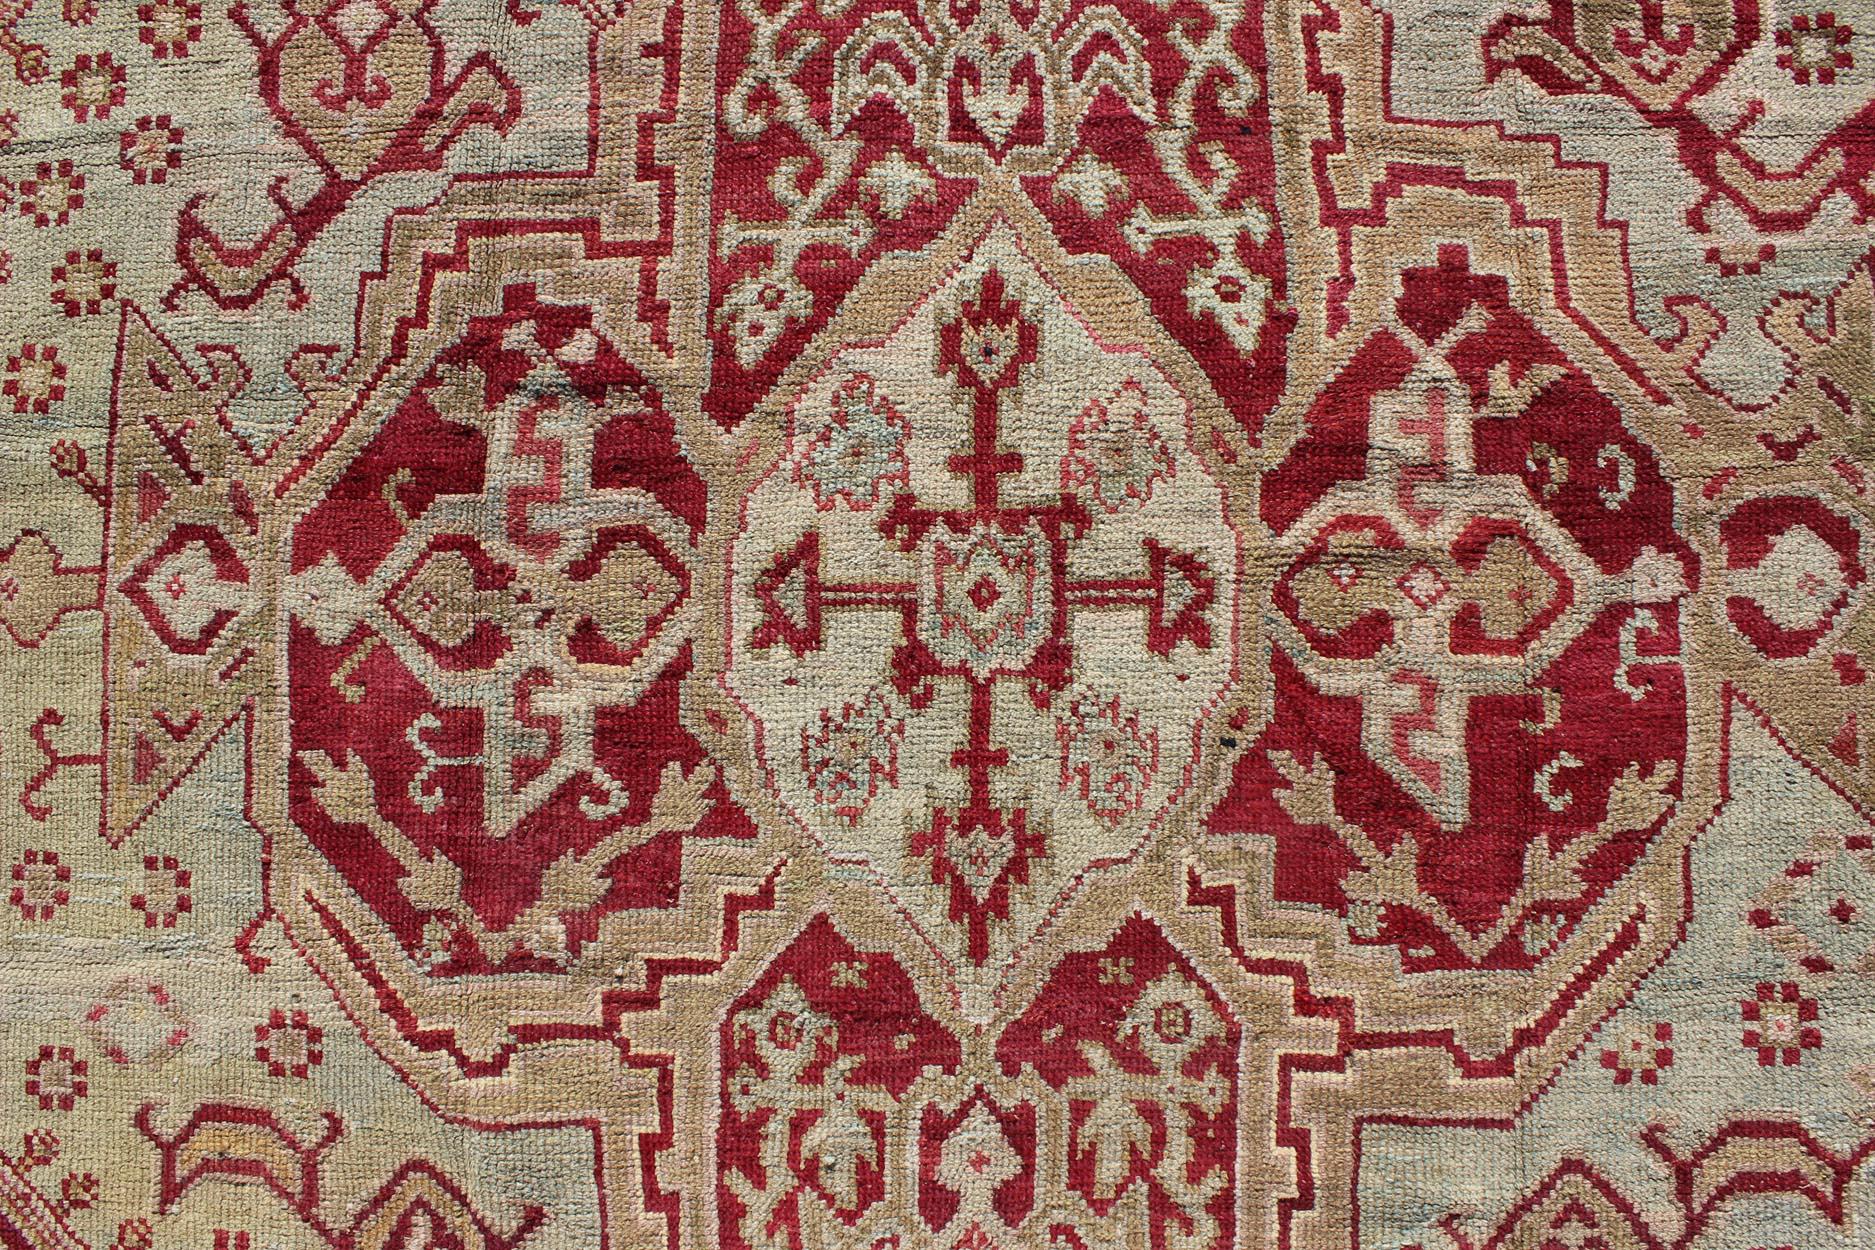 Antique Turkish Ghiordes 19th Century Rug in Raspberry Red, Ice Blue & L. Green For Sale 3